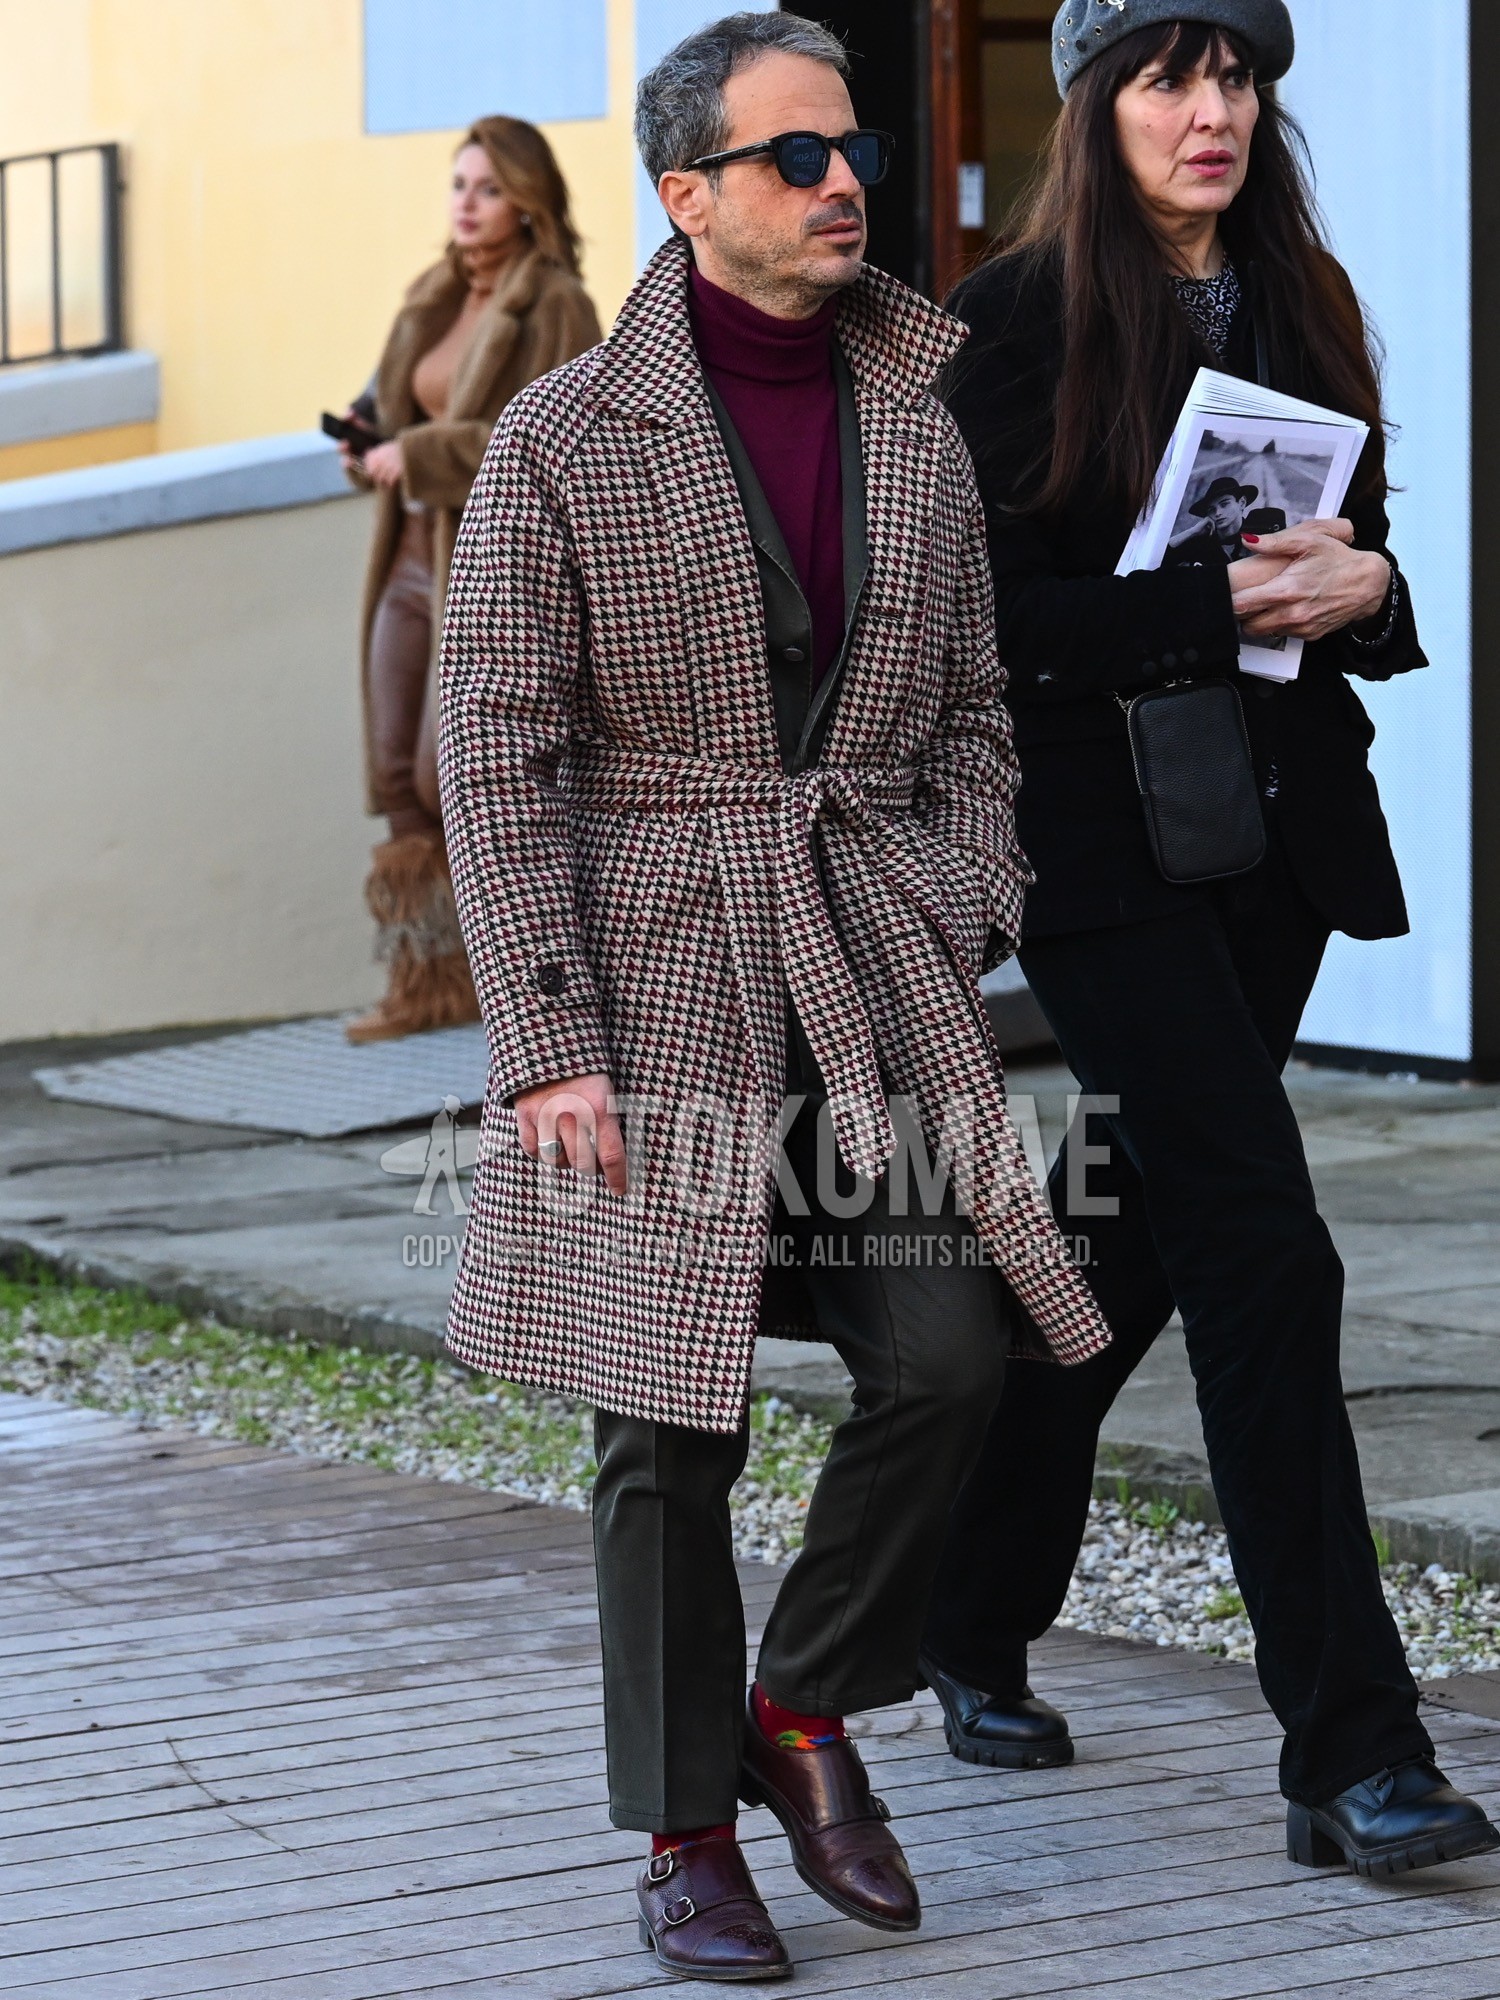 Men's autumn winter outfit with blue plain sunglasses, beige red black check belted coat, red plain turtleneck knit, red socks socks, brown monk shoes leather shoes, gray plain suit.